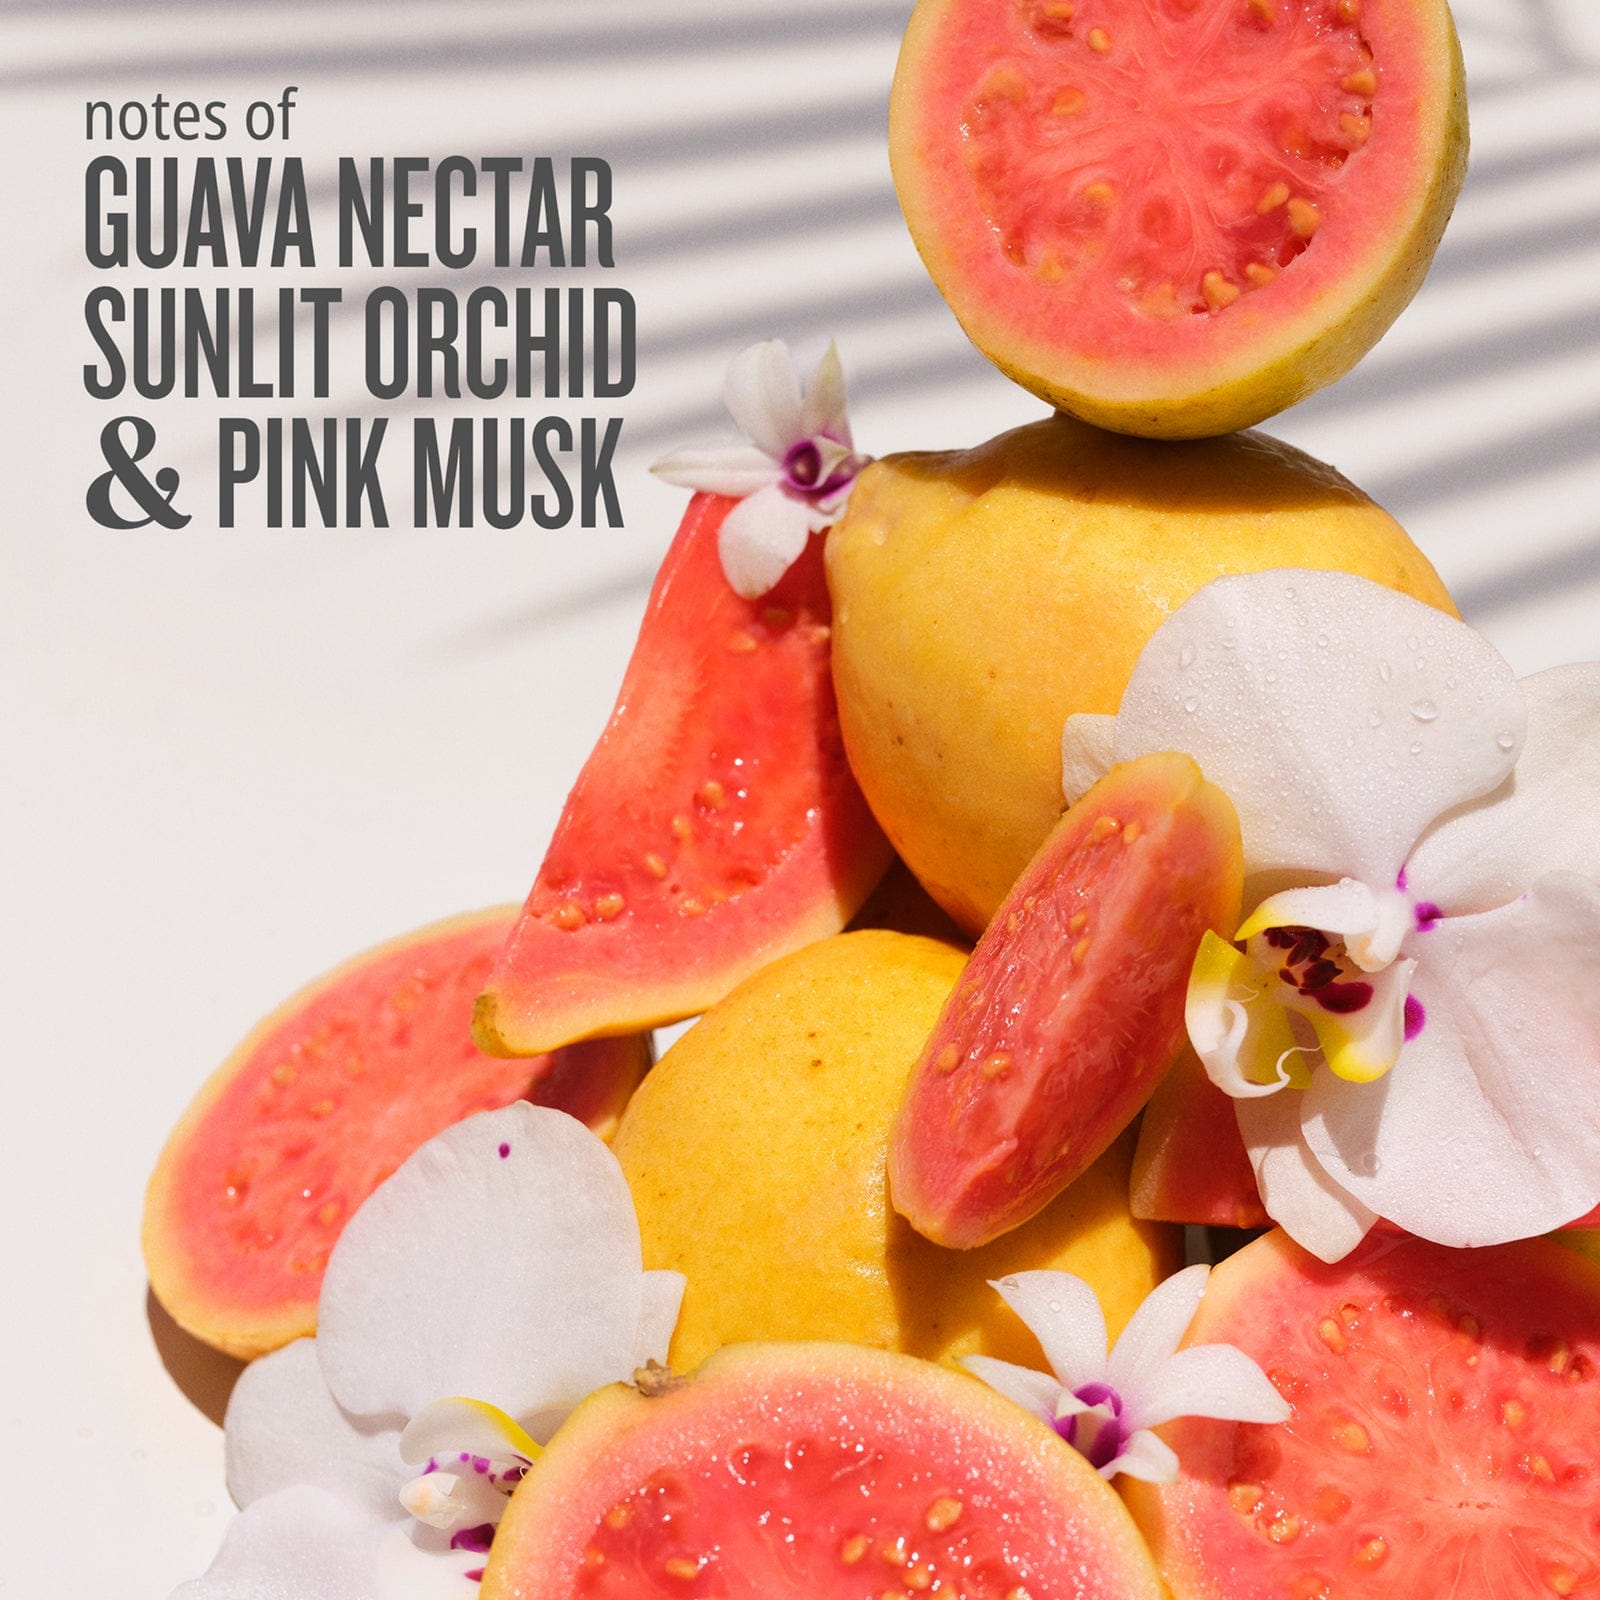 Notes of guava nectar sunlit orchid &amp; pink musk